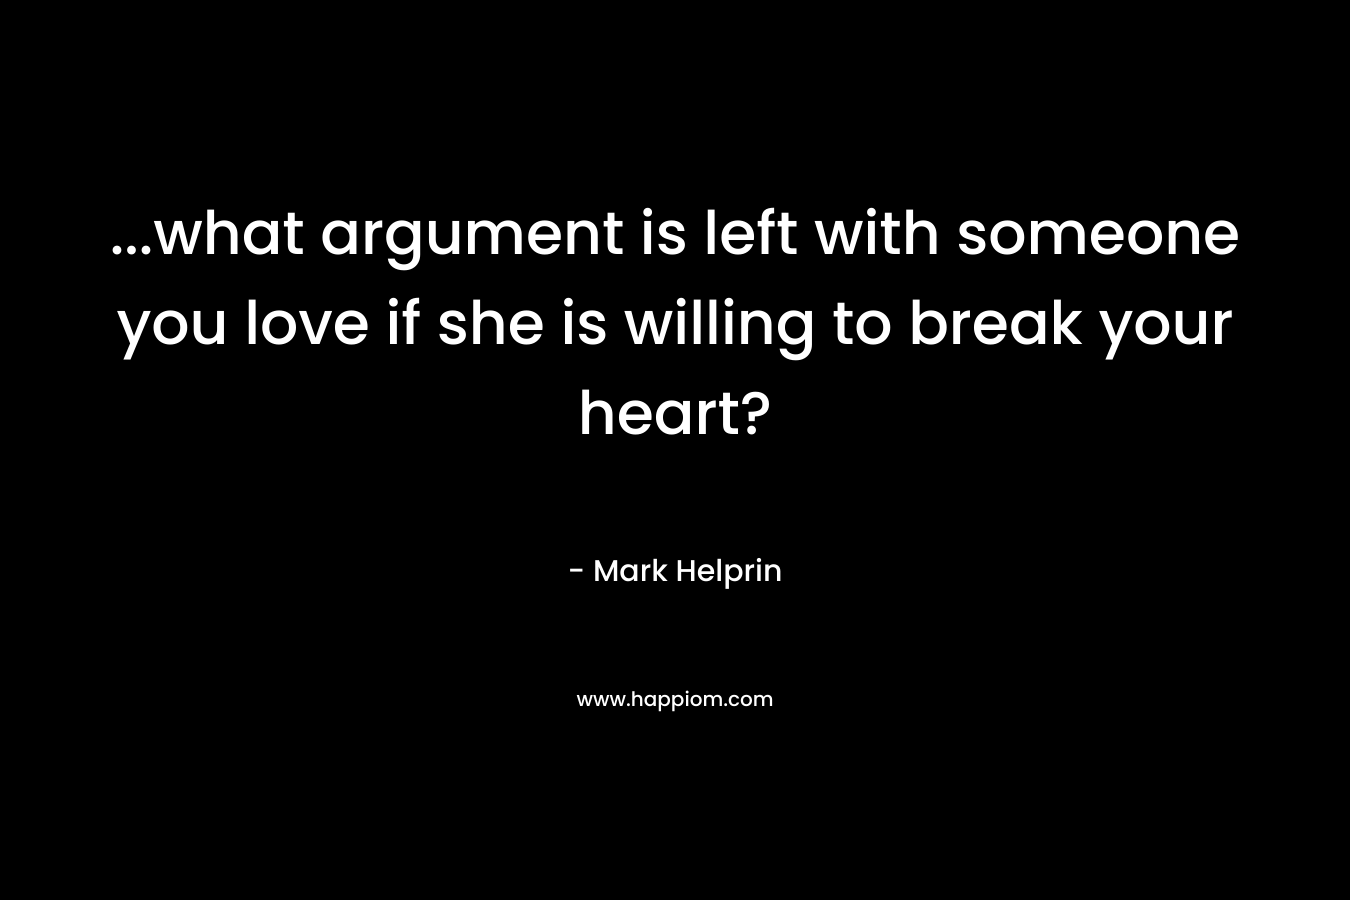 ...what argument is left with someone you love if she is willing to break your heart?